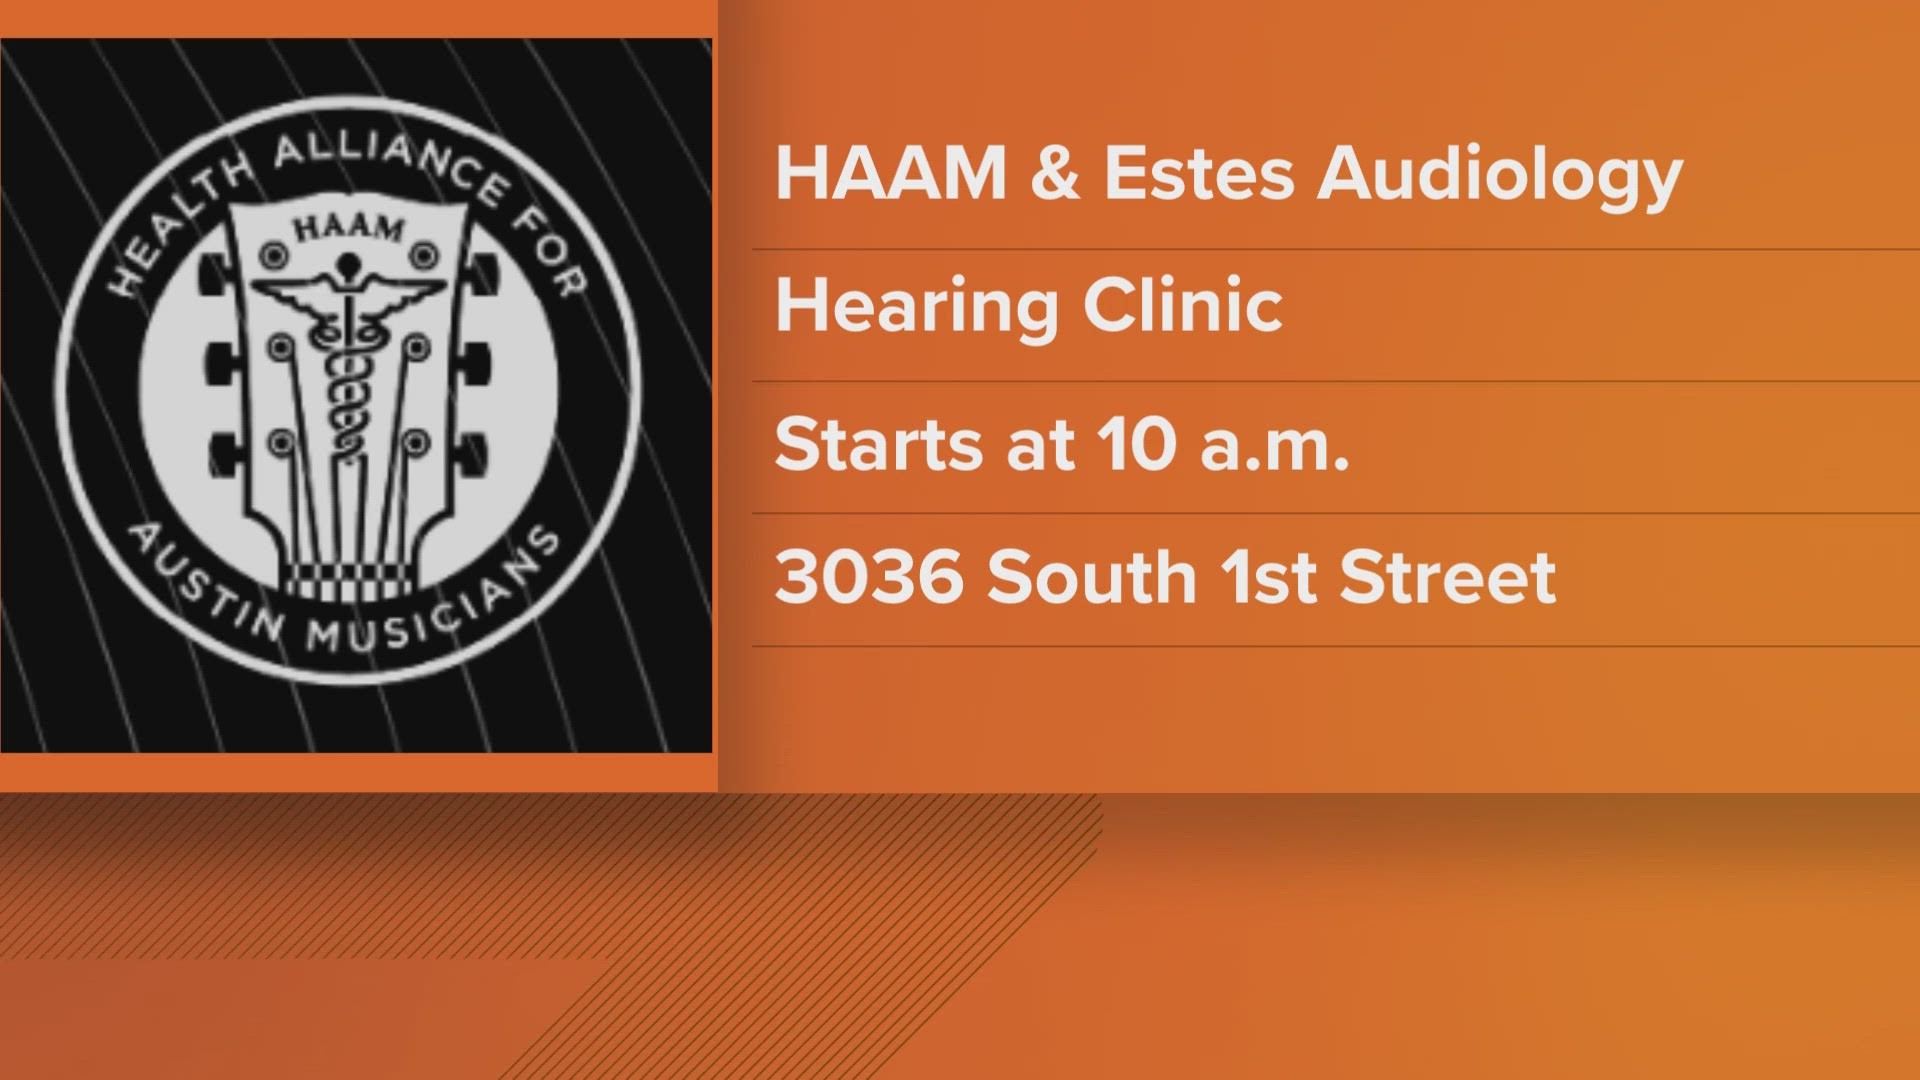 The Hear Clinic is being hosted by the Health Alliance for Austin Musicians and Estes Audiology.